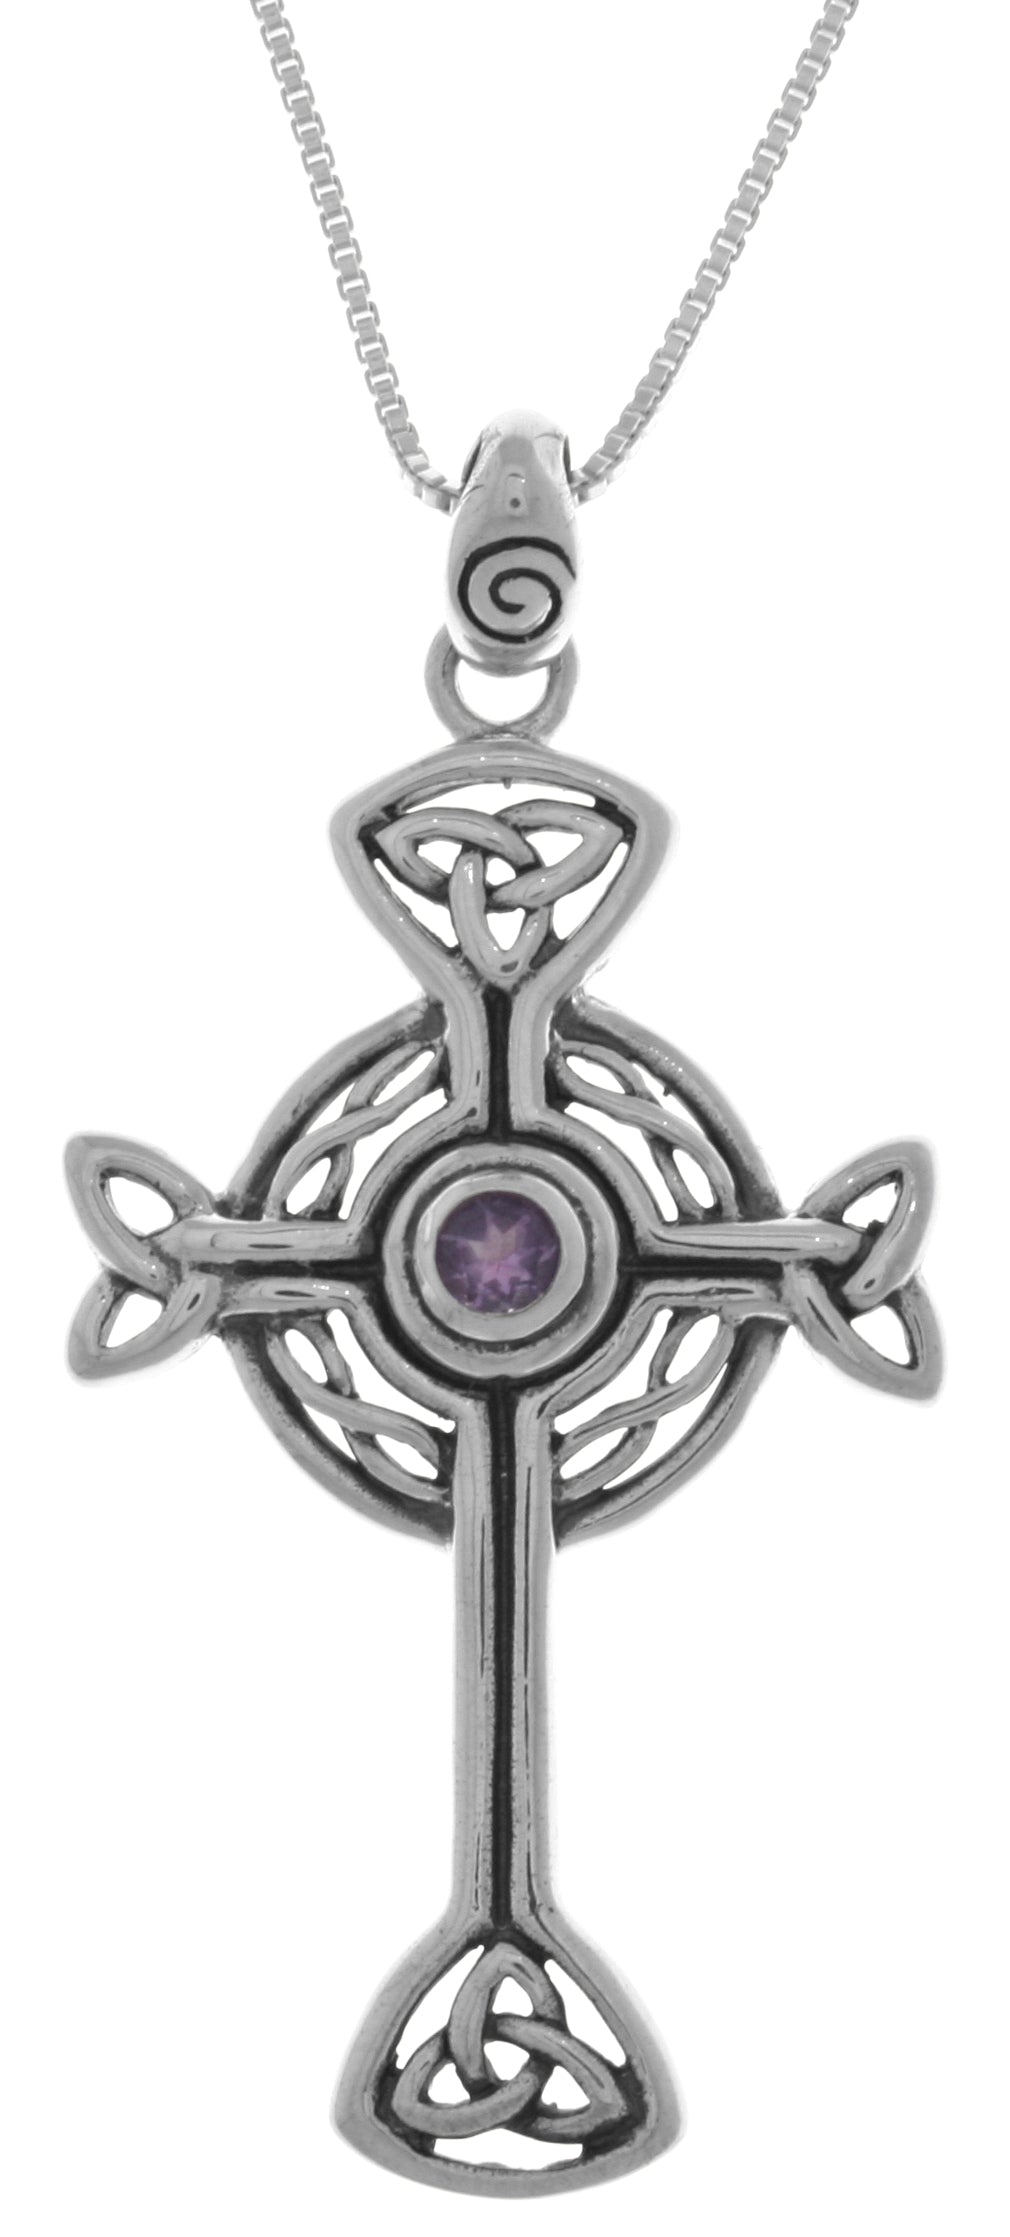 Jewelry Trends Sterling Silver Celtic Trinity Circle of Life Cross Pendant with Amethyst on 18 Inch Chain Necklace